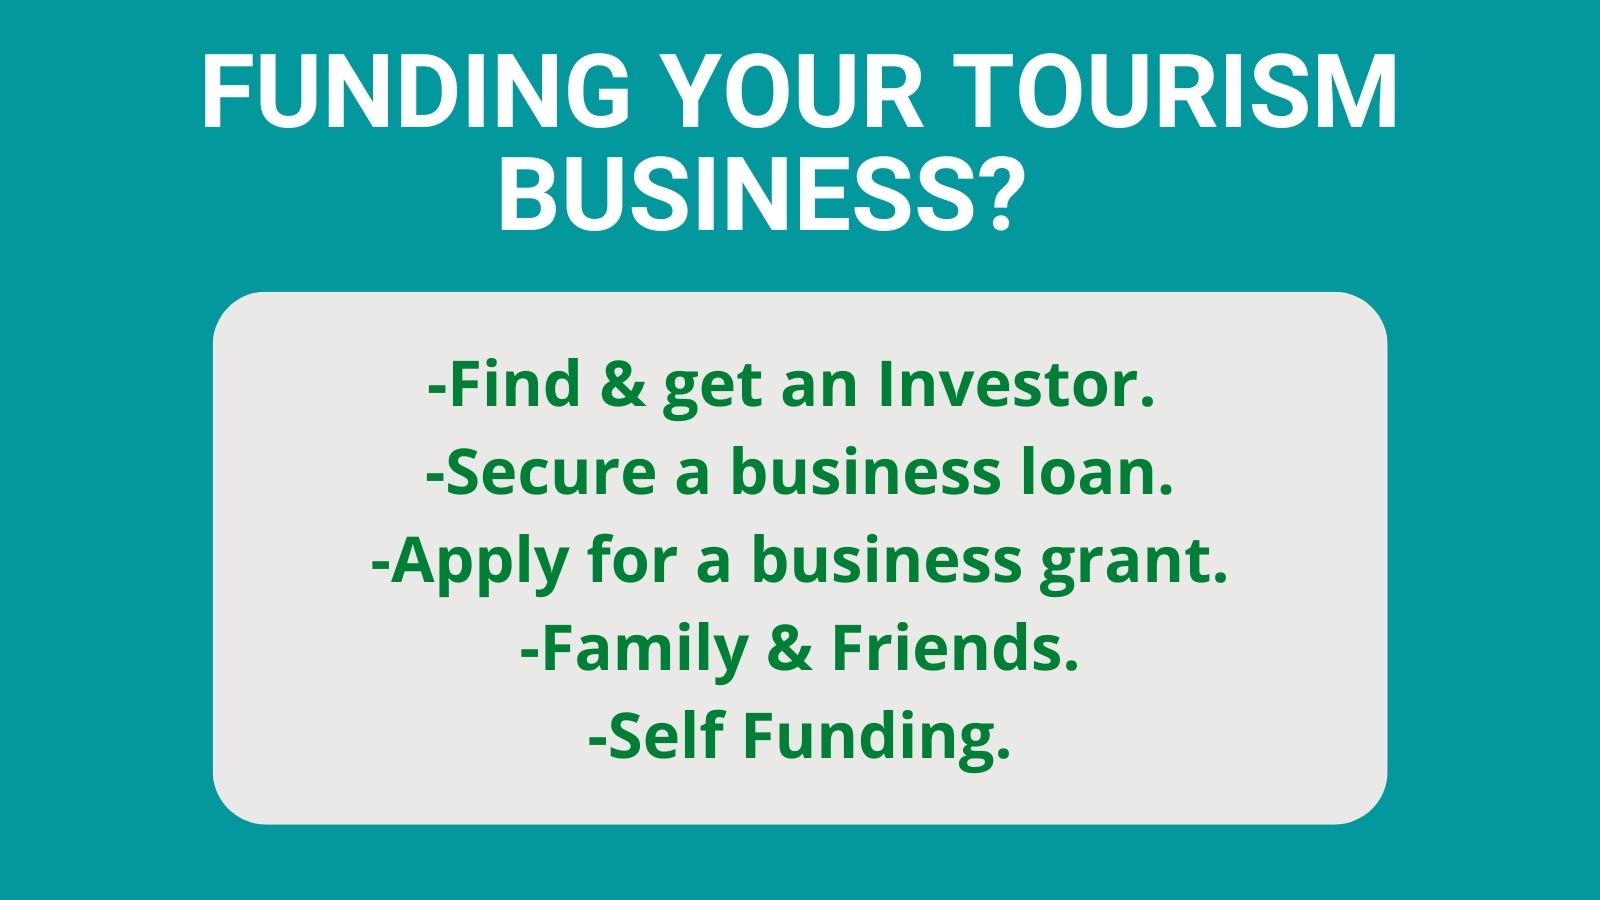 How To Find Funding For A Tourism Business